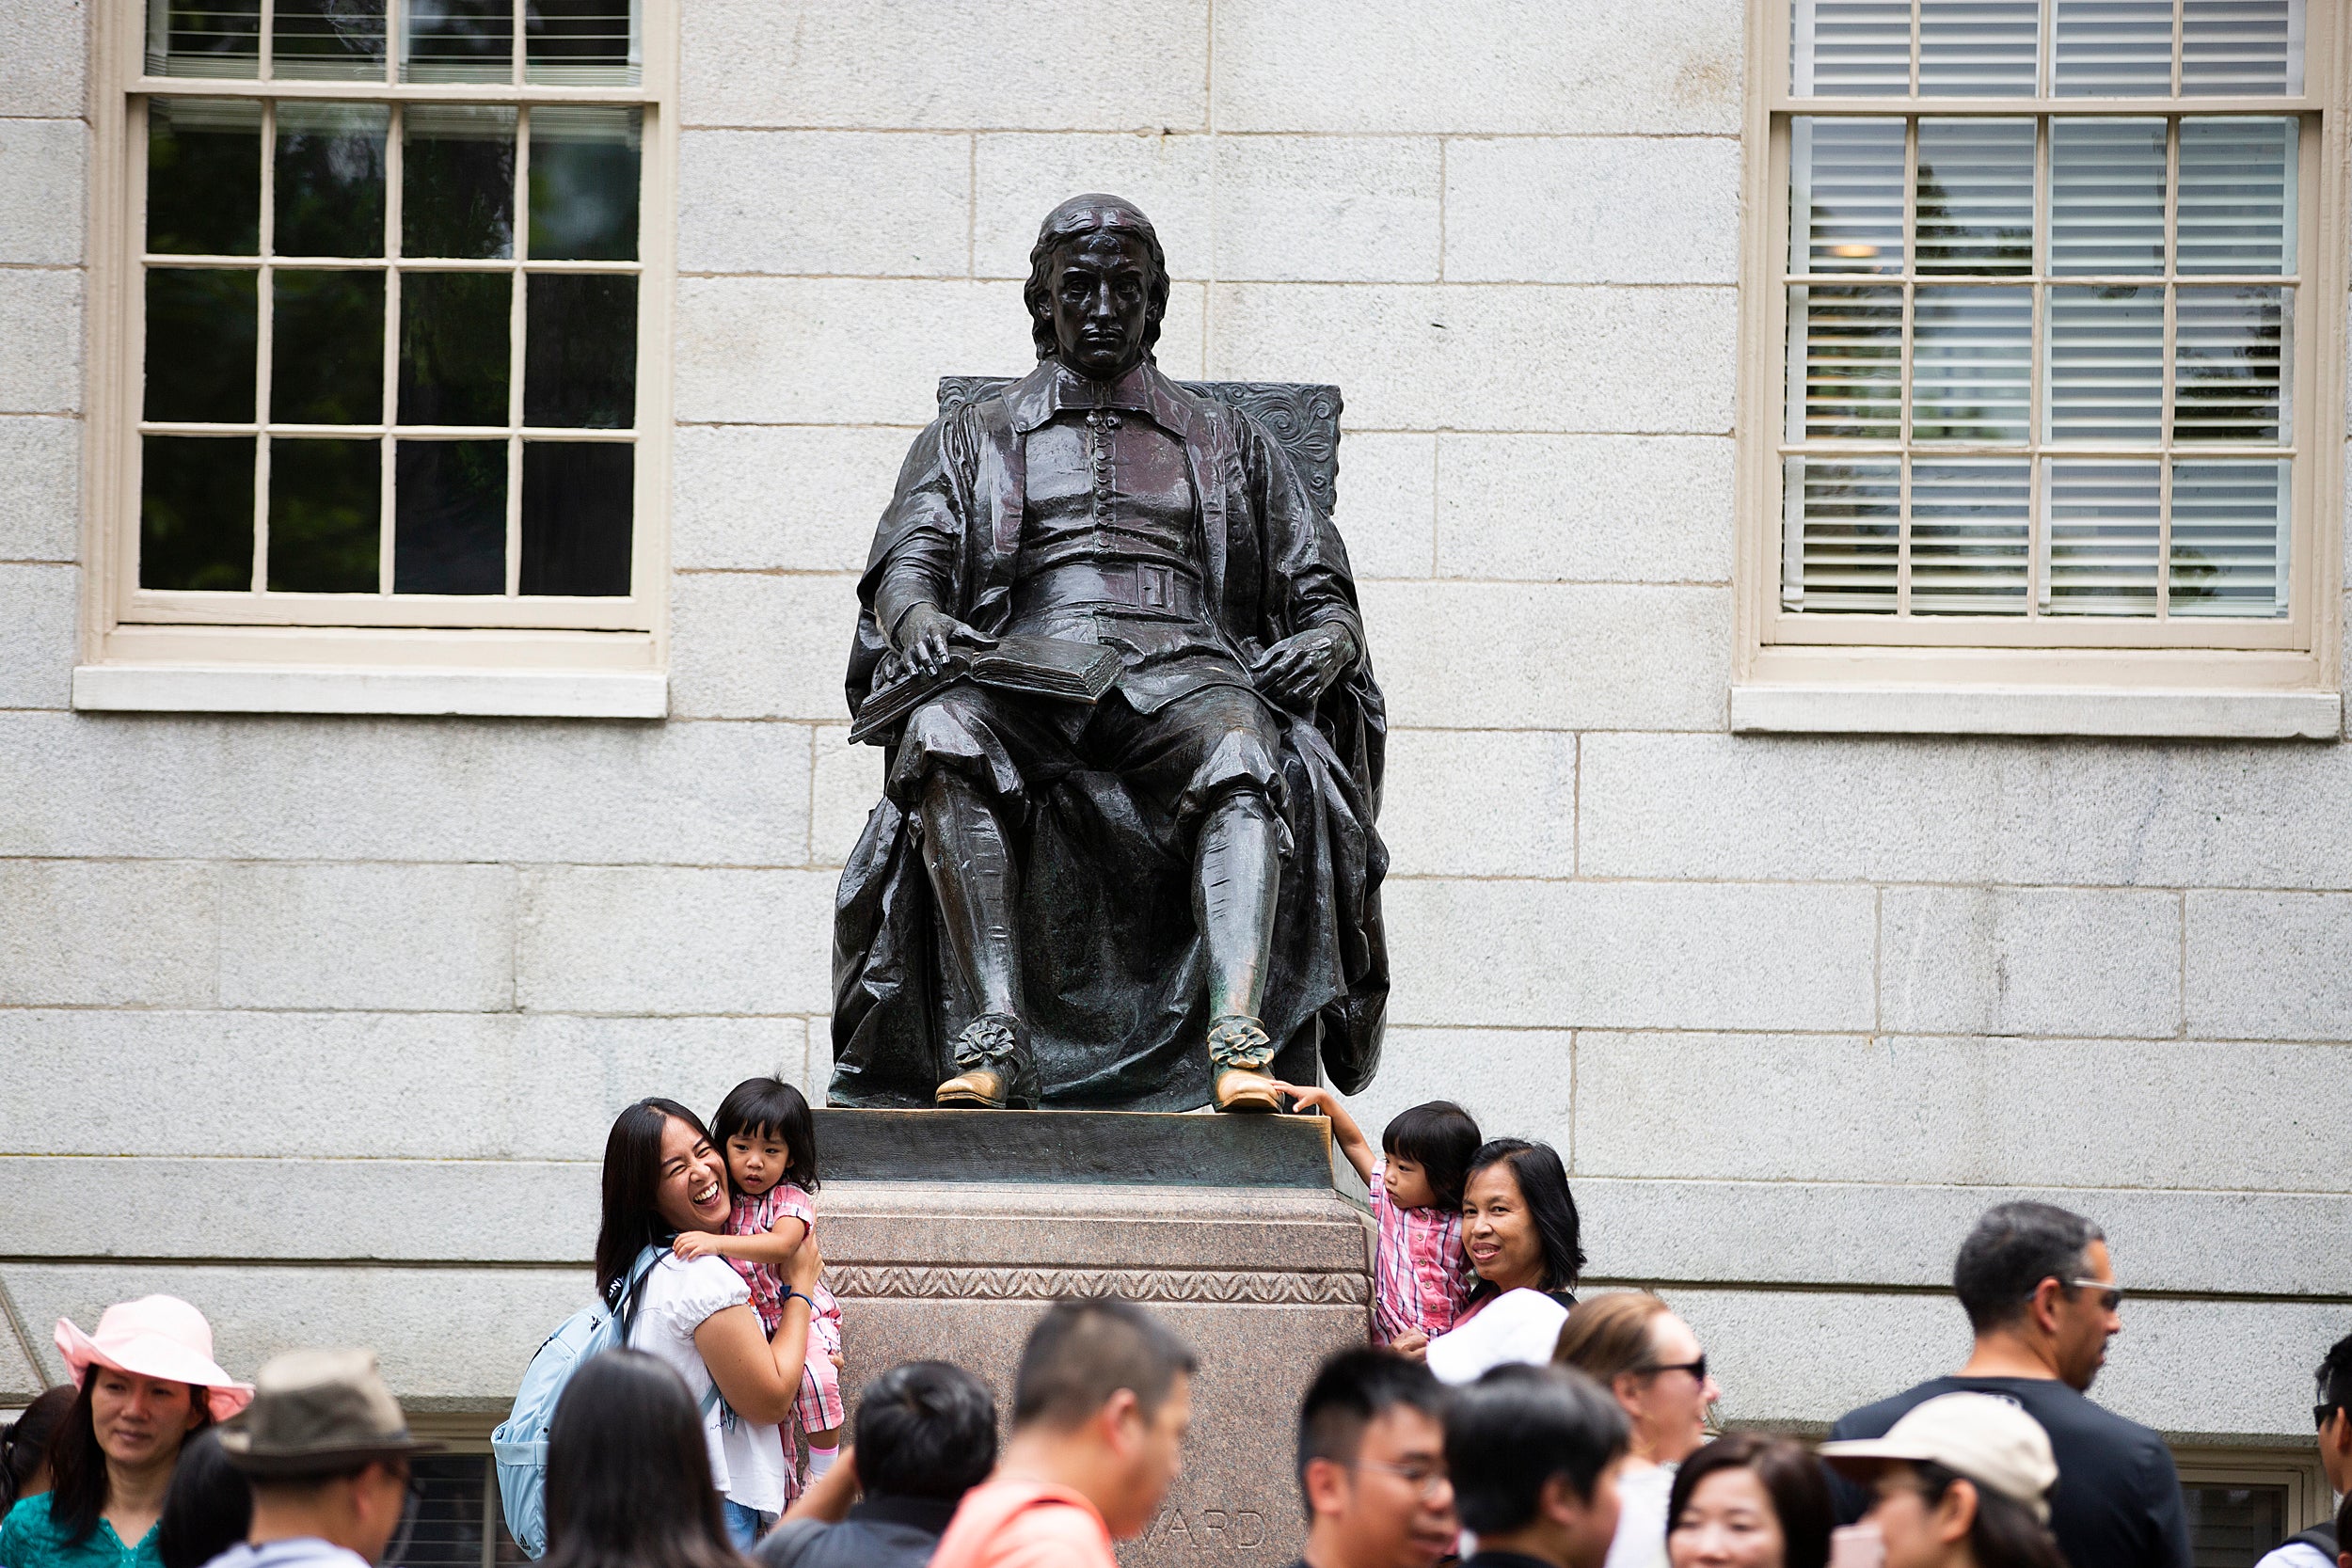 Visitors crowd the John Harvard statue, raising children to touch the foot.